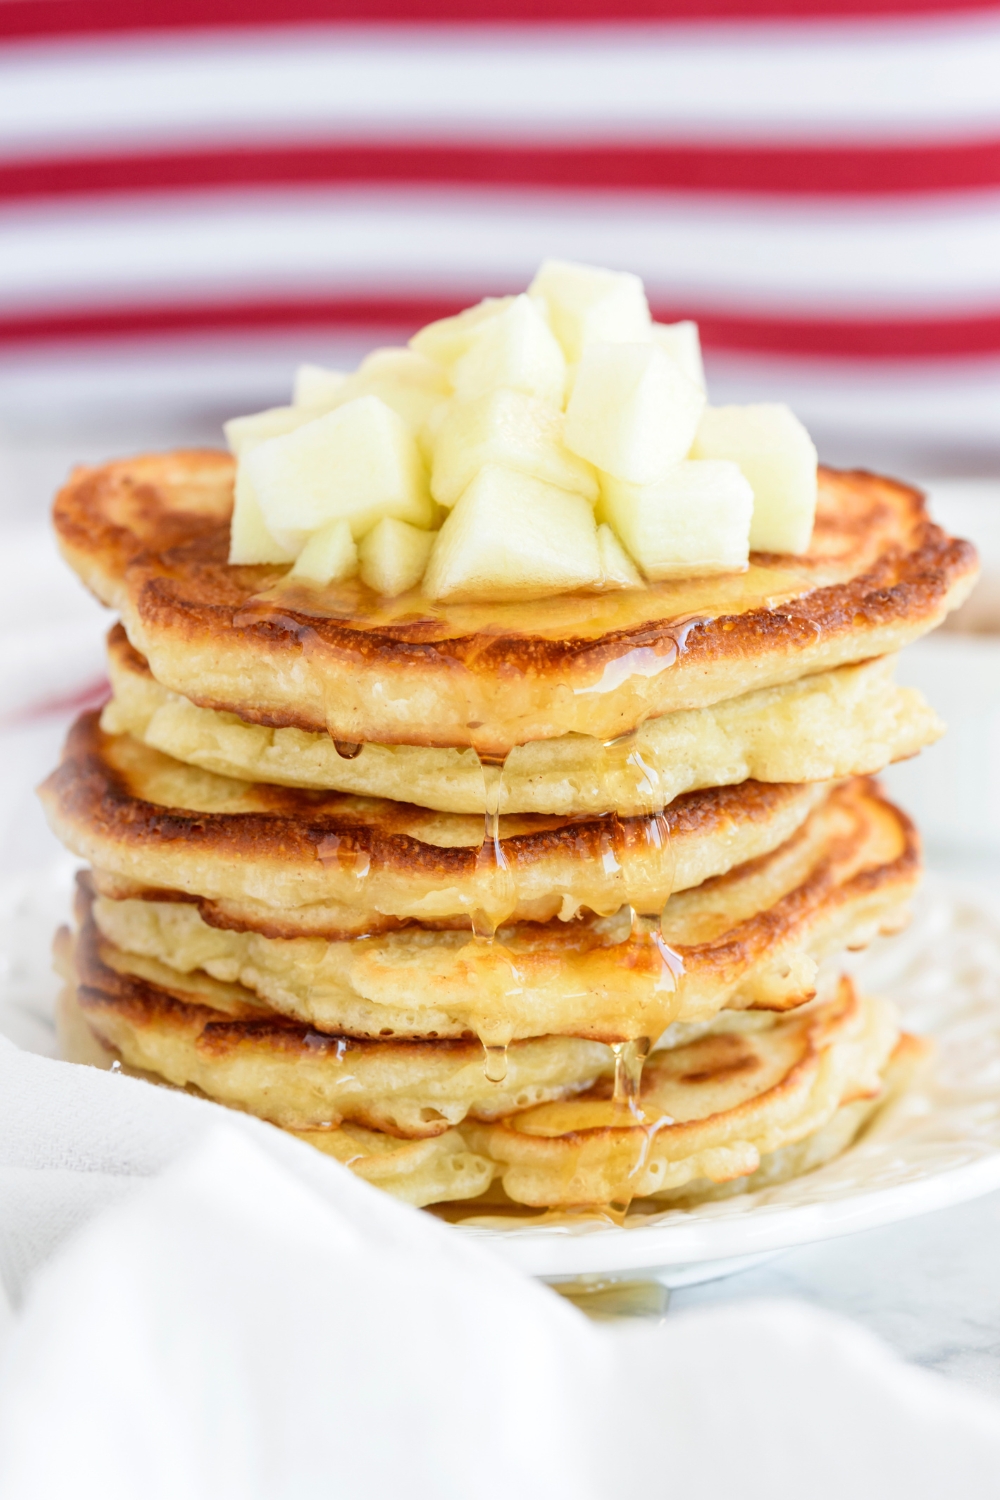 A stack of golden brown pancakes topped with diced apples with honey dripping down the sides of the pancakes.